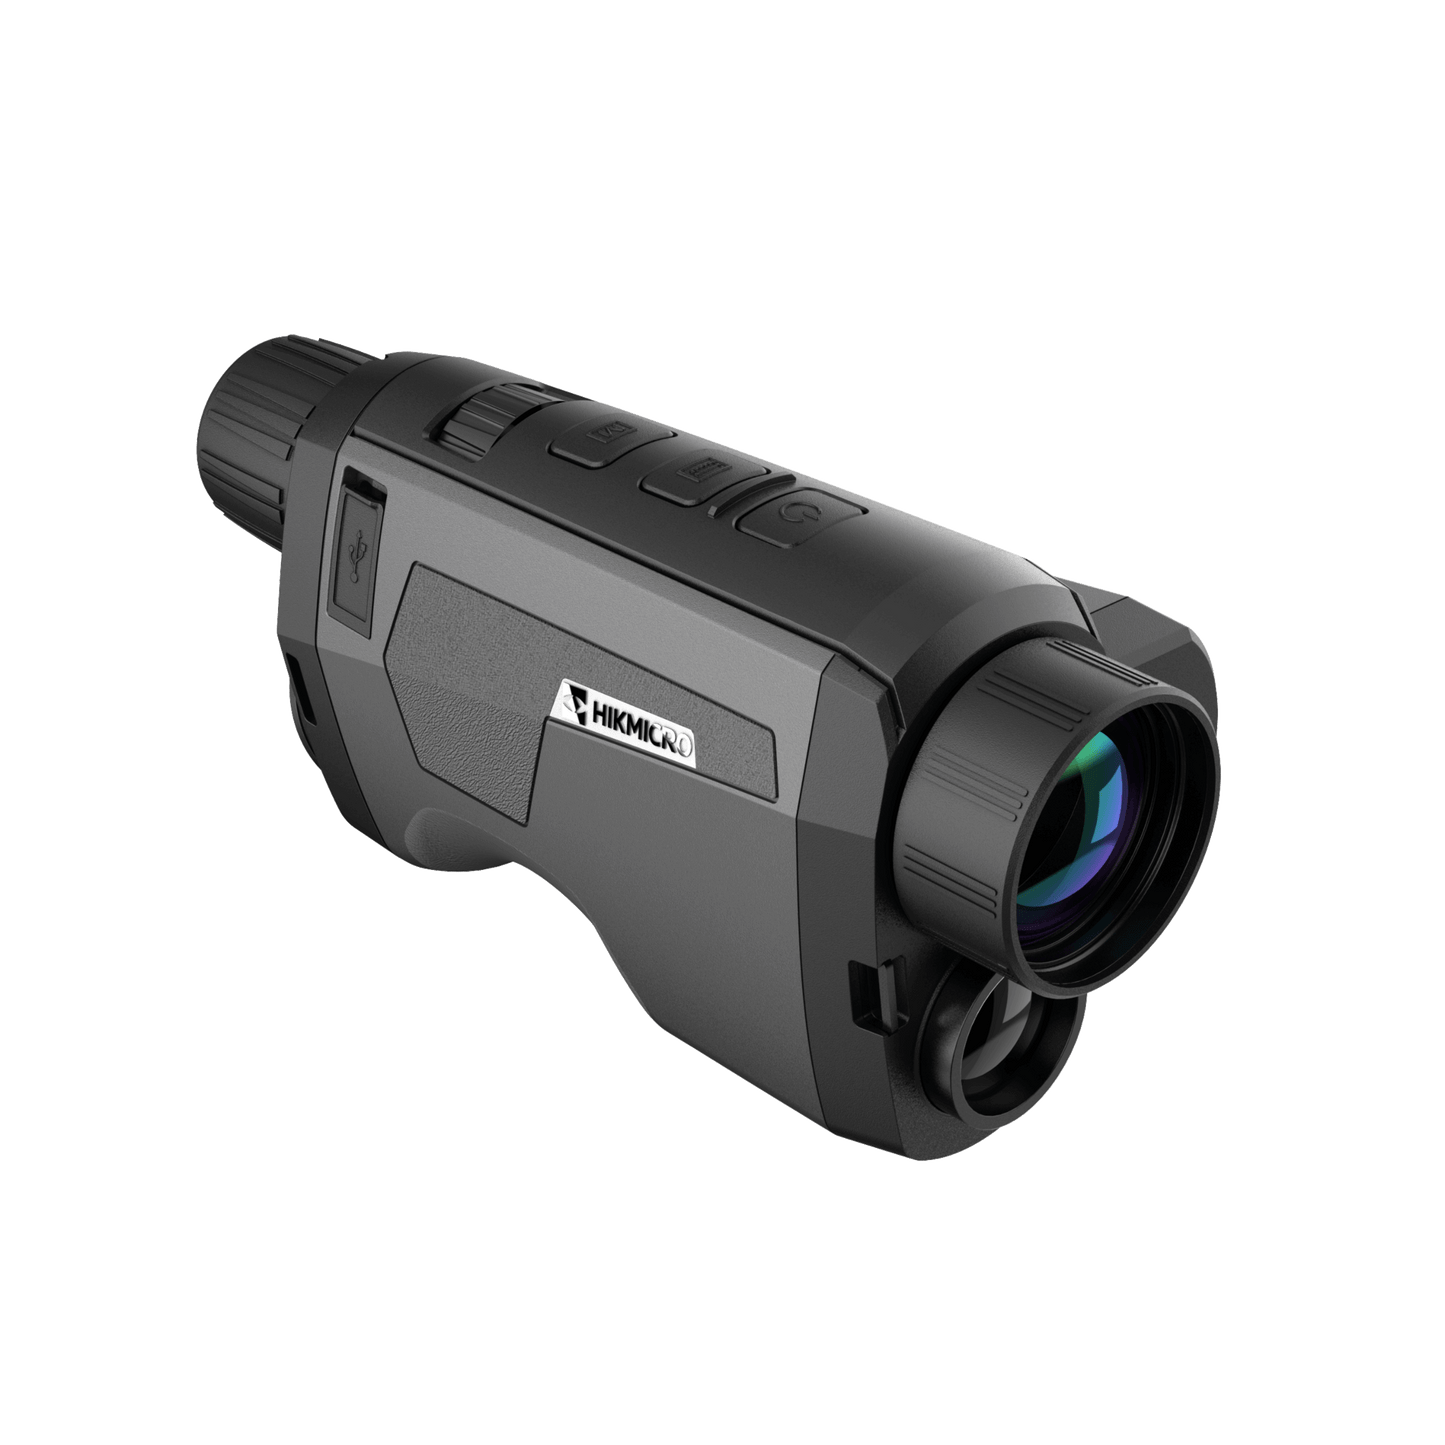 Cape Thermal imaging monocular for sale - HikMicro Gryphon GH35L Handheld thermal monocular front left view without eye piece